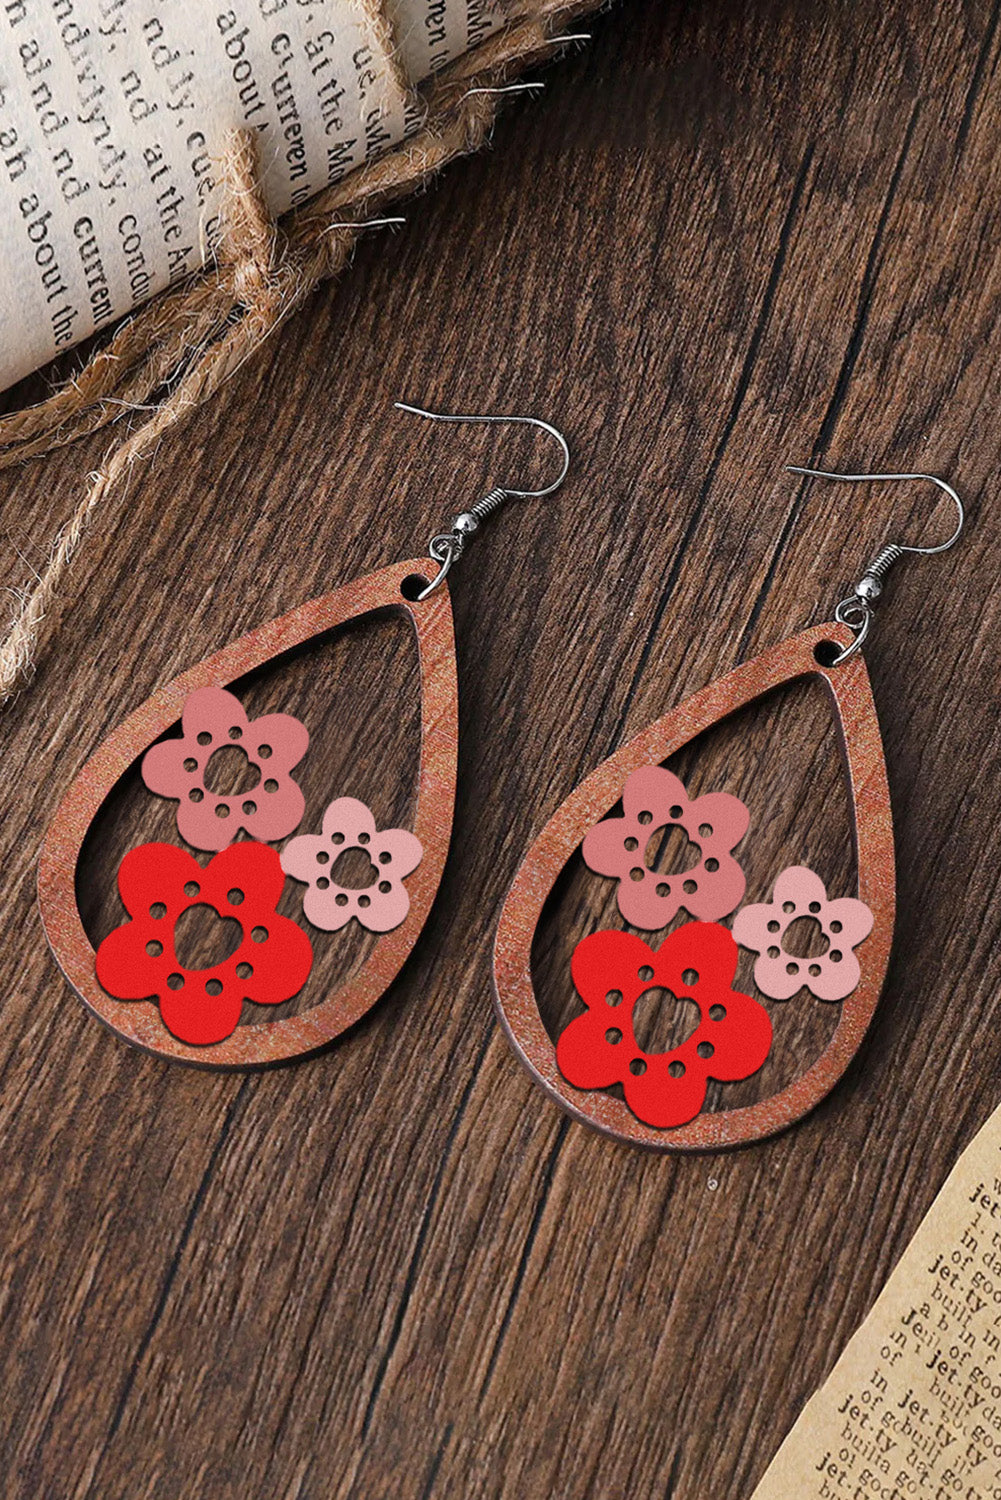 Pink Hollow-out Flower Drop Earrings Jewelry JT's Designer Fashion